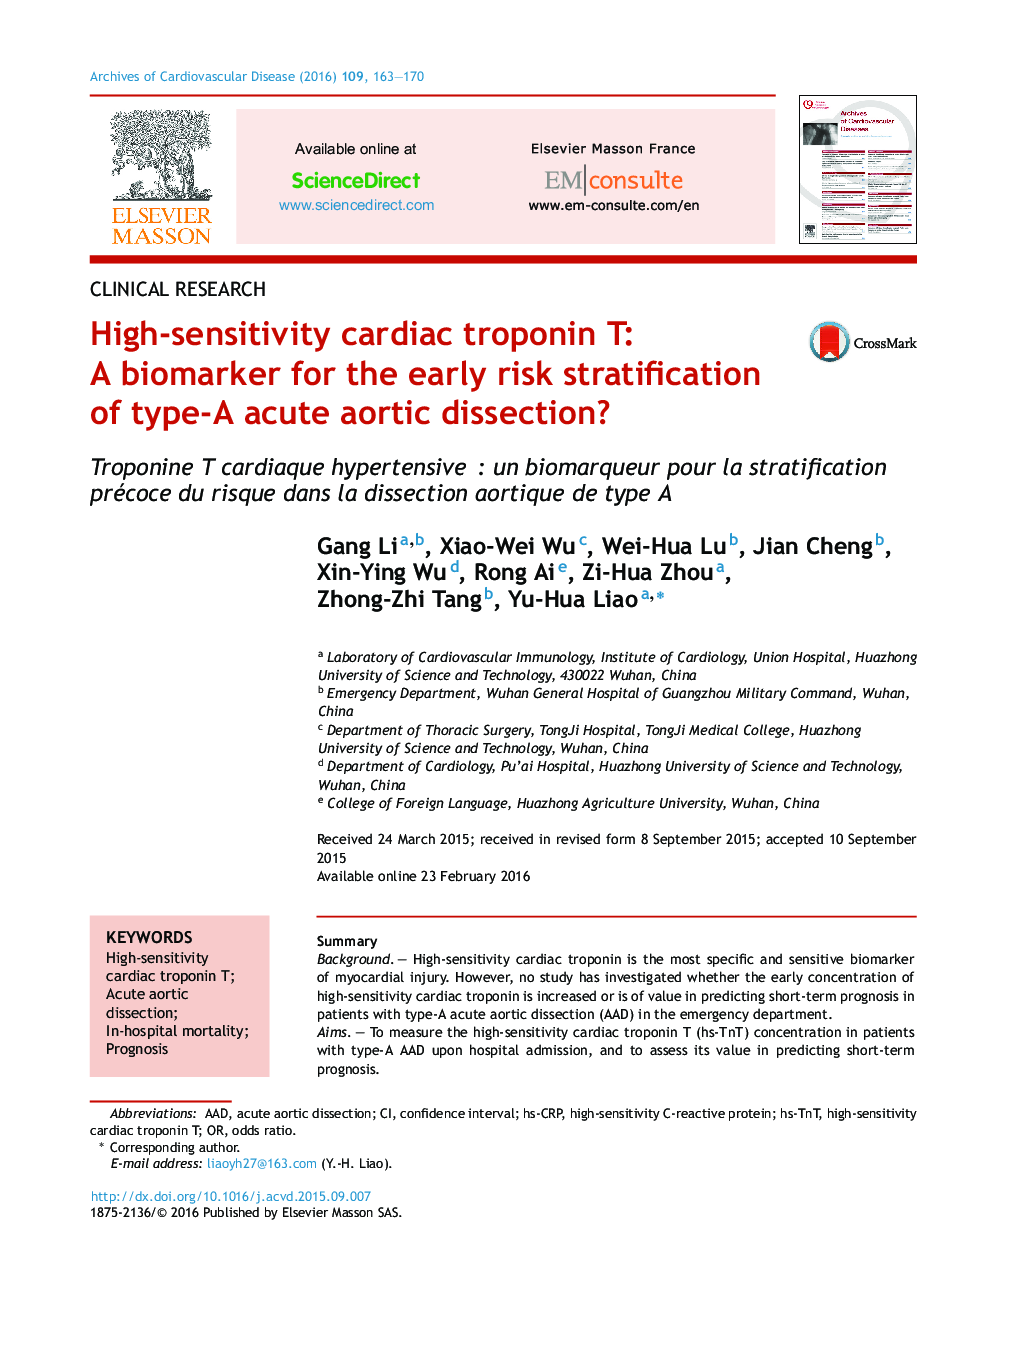 High-sensitivity cardiac troponin T: A biomarker for the early risk stratification of type-A acute aortic dissection?